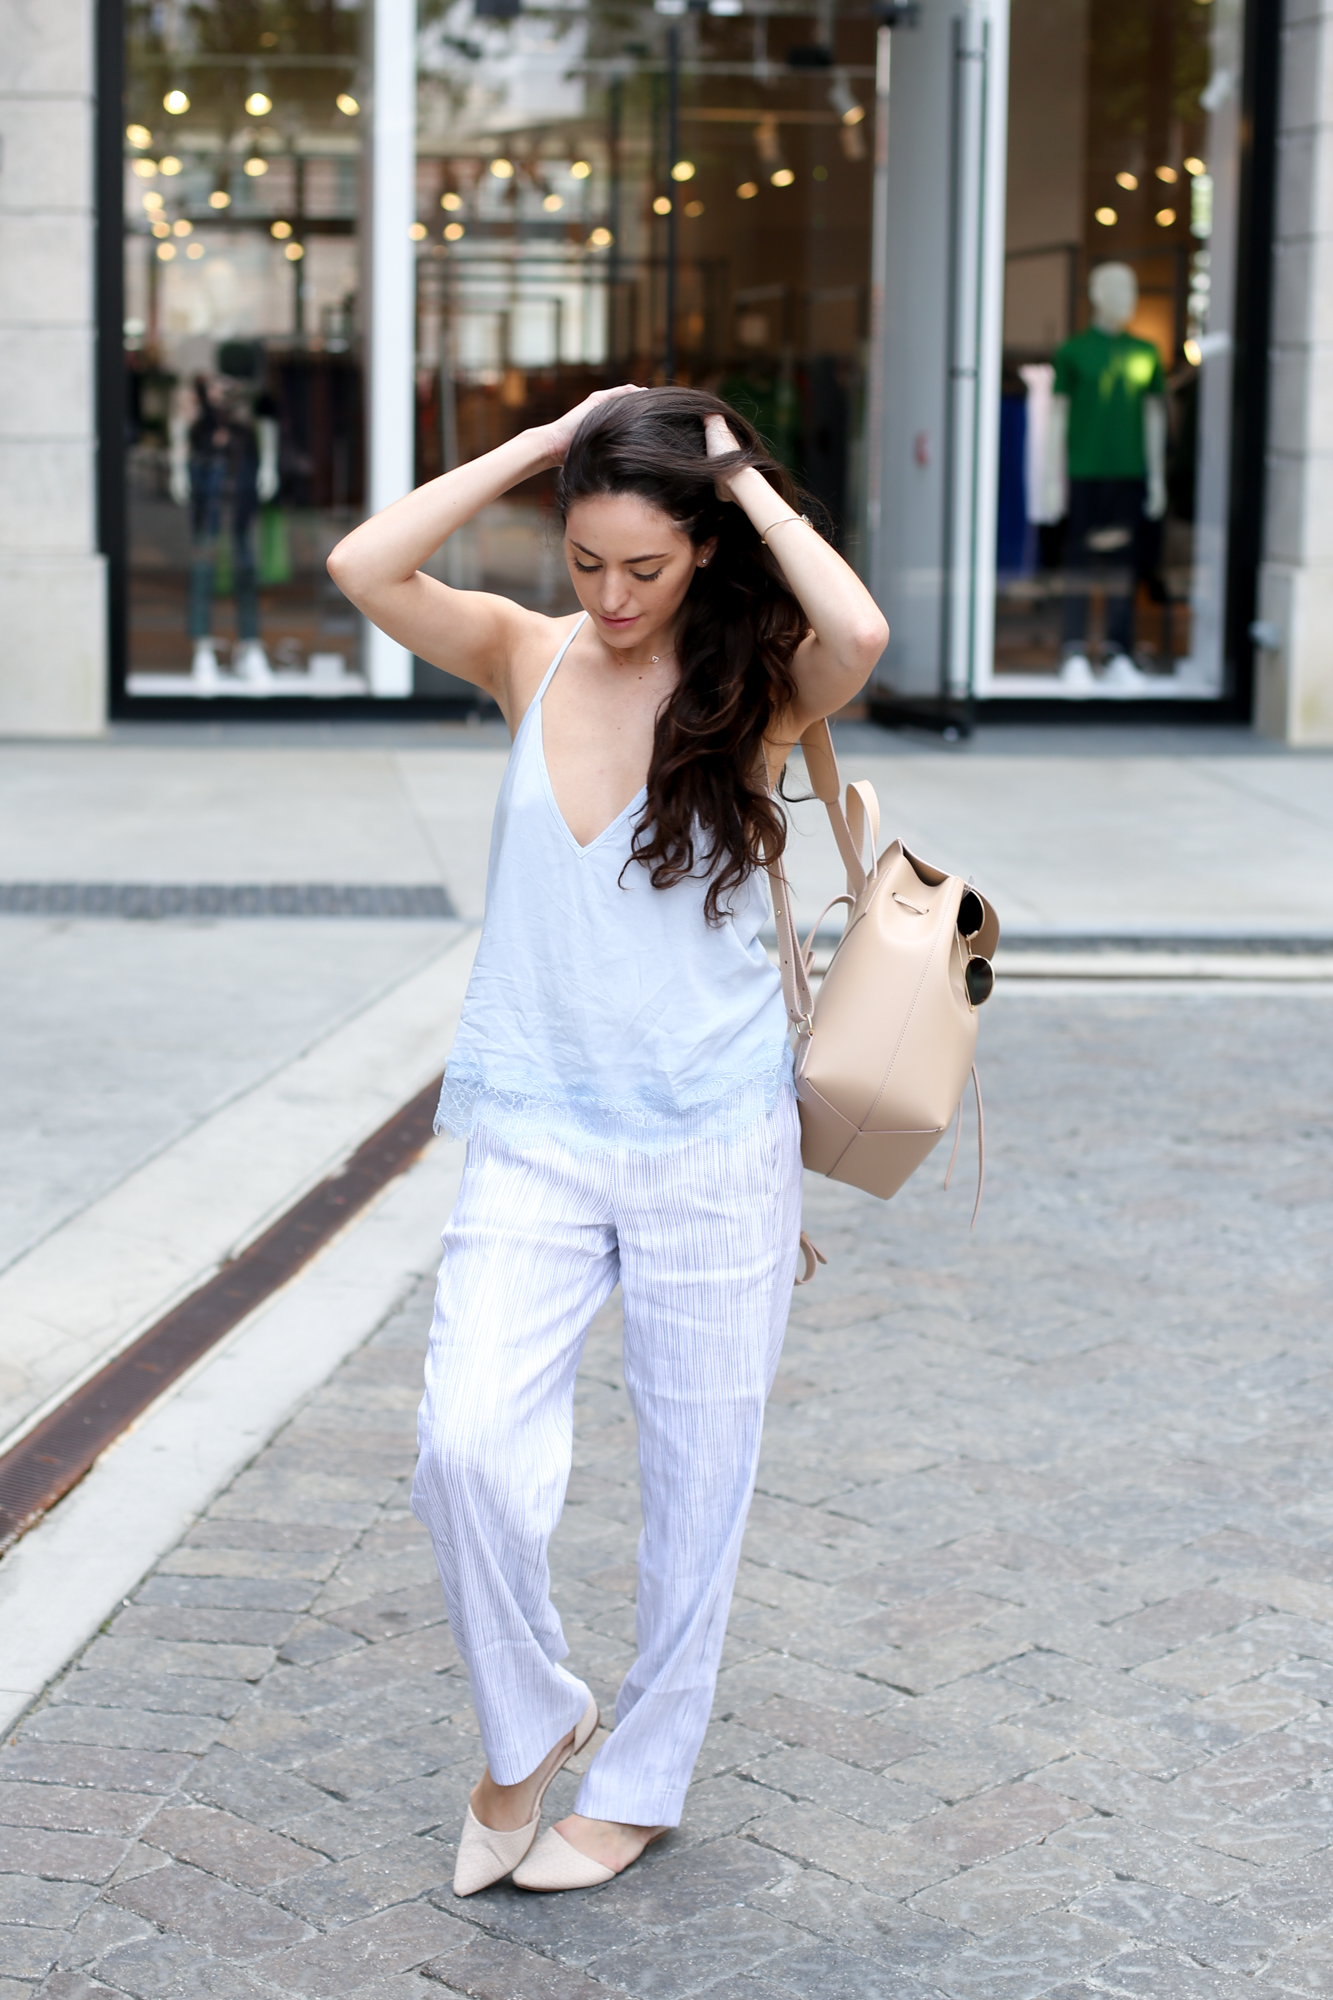 how to wear pajamas in the daytime, how to wear pajamas in public, how to style pajamas, chic pajama style, comfortable chic, armadio backpack, baby blue outfit ideas, casual outfit ideas, comfortable outfit ideas